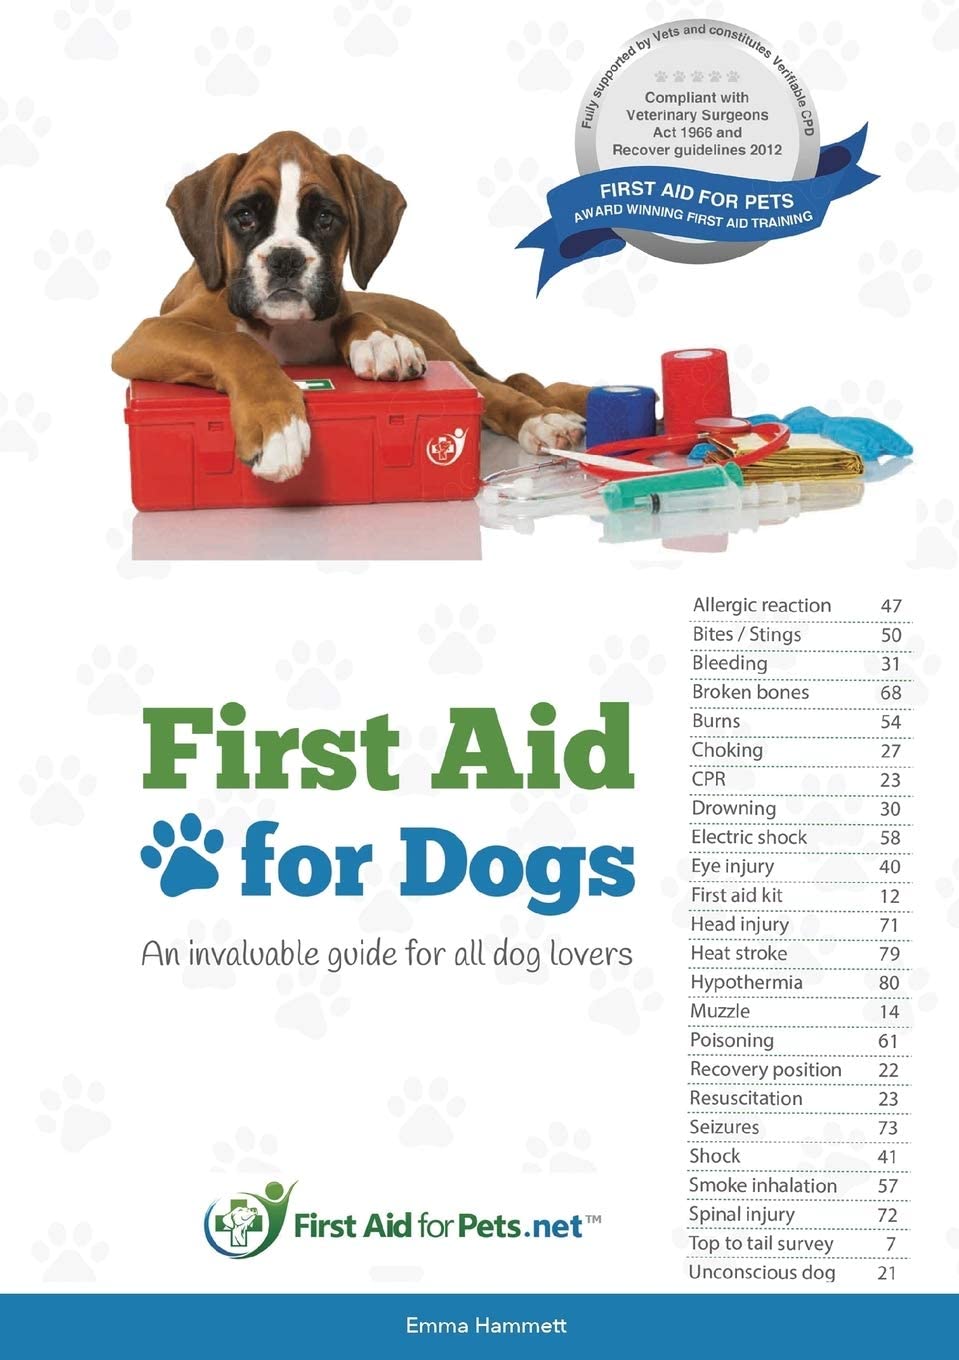 First Aid for Dogs: An invaluable guide for all dog lovers